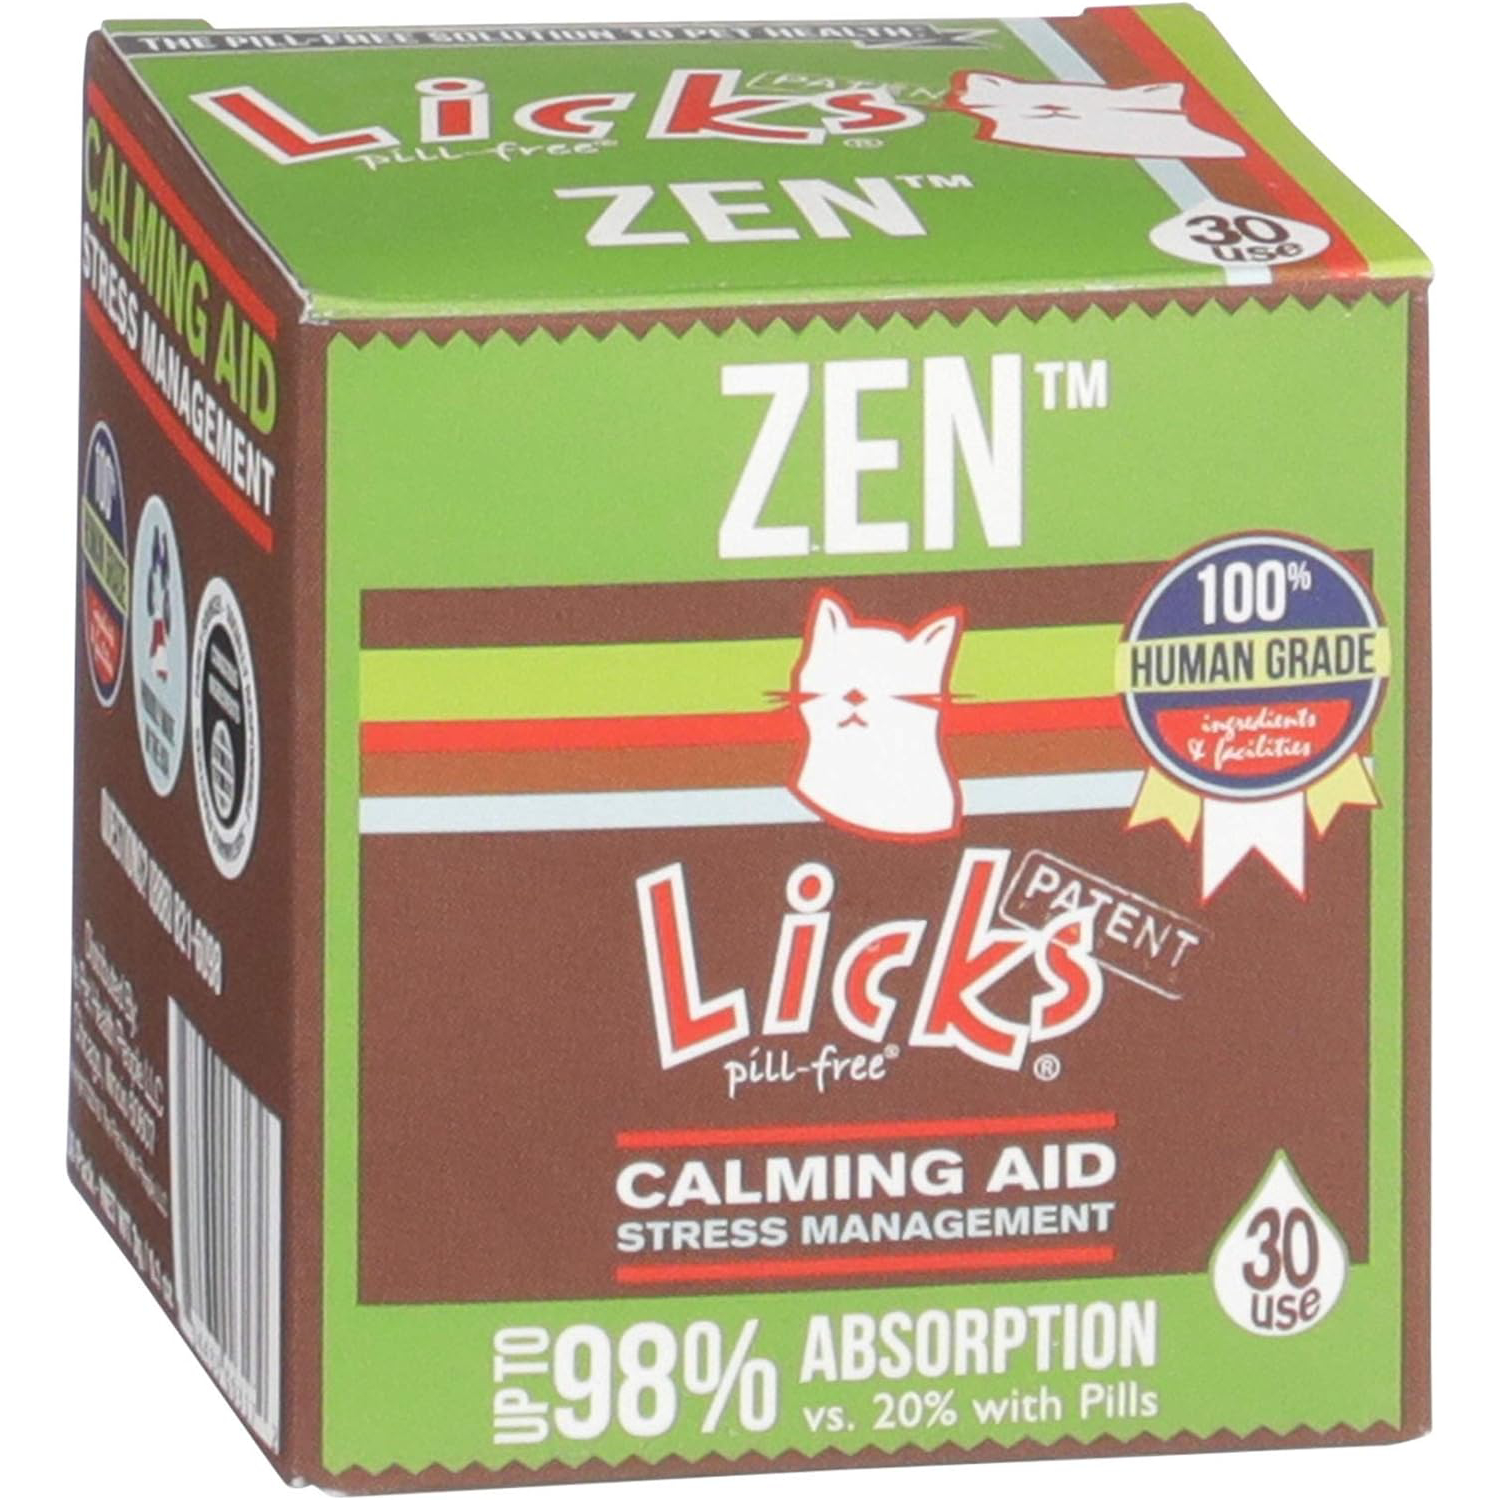 Licks Pill-Free Zen Cat Calming - Natural Calming Aid for Aggressive Behavior and Nervousness - Calming Cat Treats for Stress Relief & Cat Health - Gel Packets - 30 Use new